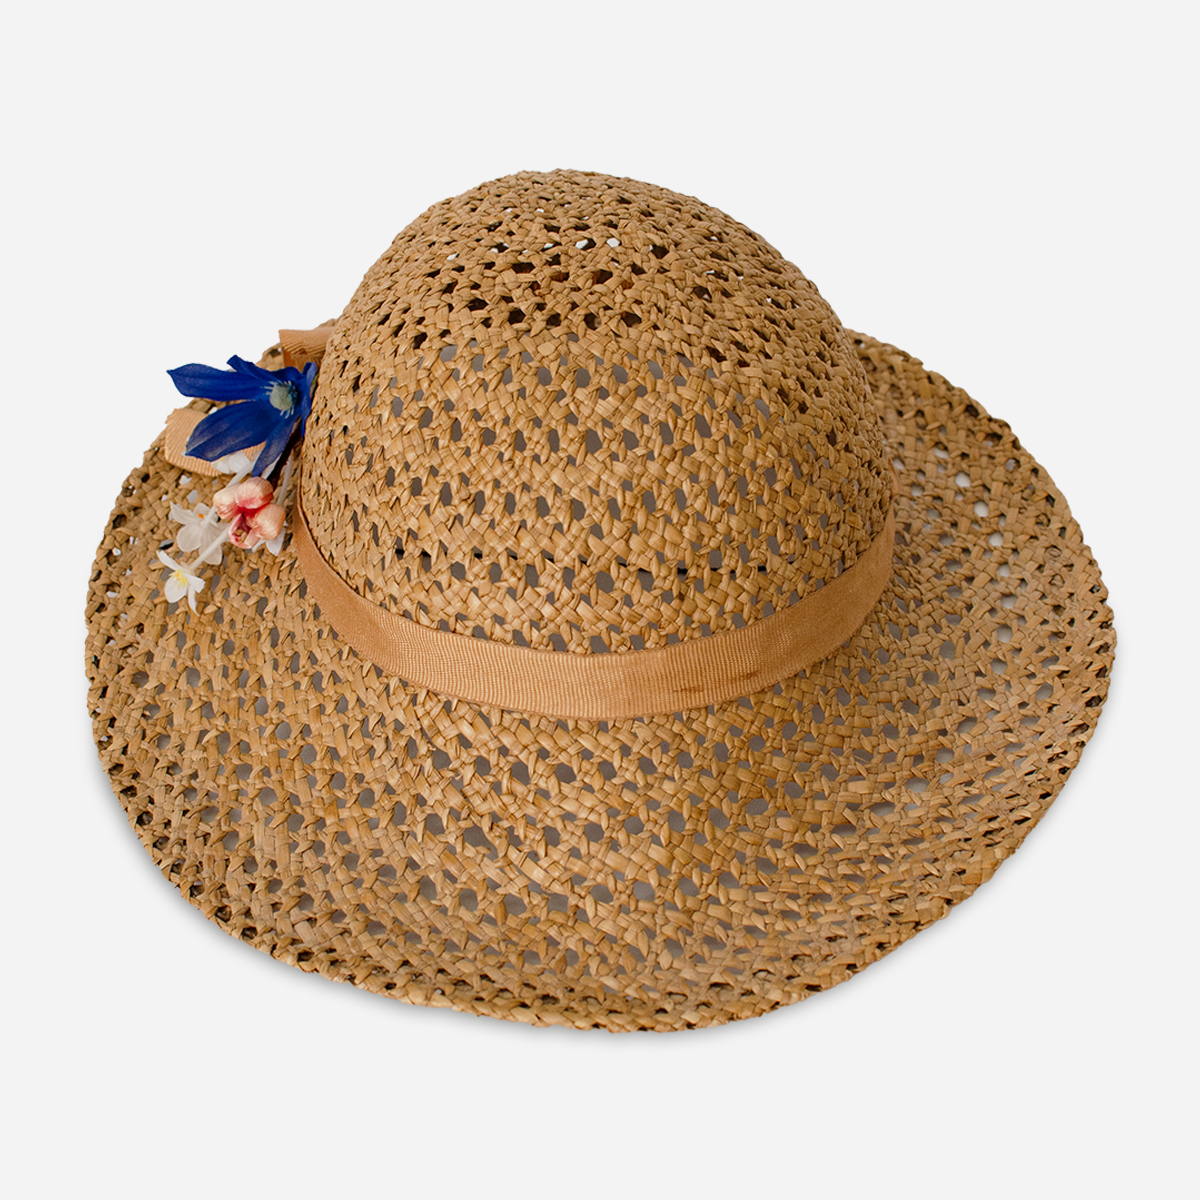 Small straw hat for summer